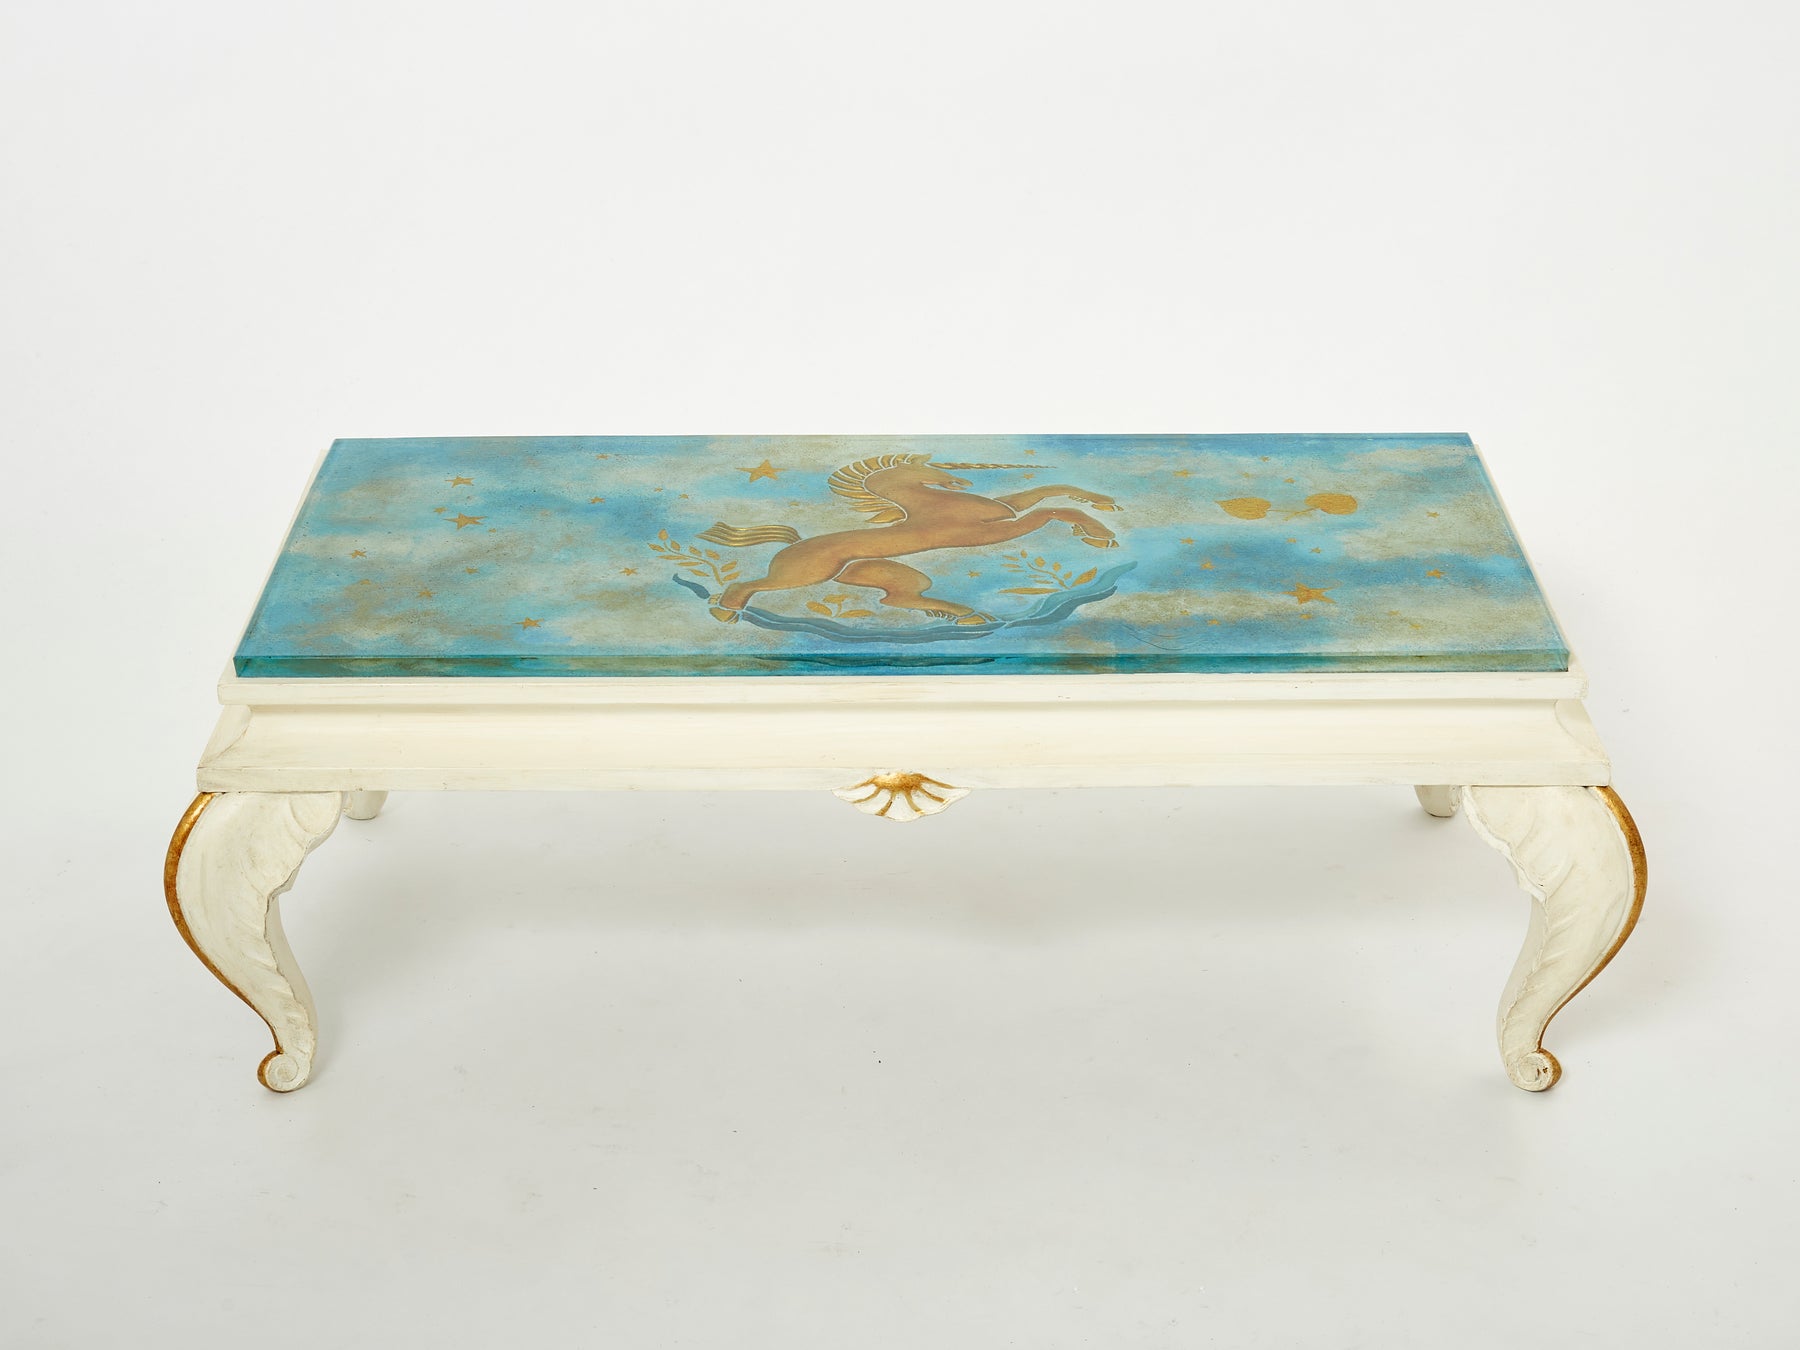 Maison Jansen gilded wood painted glass top coffee table 1950